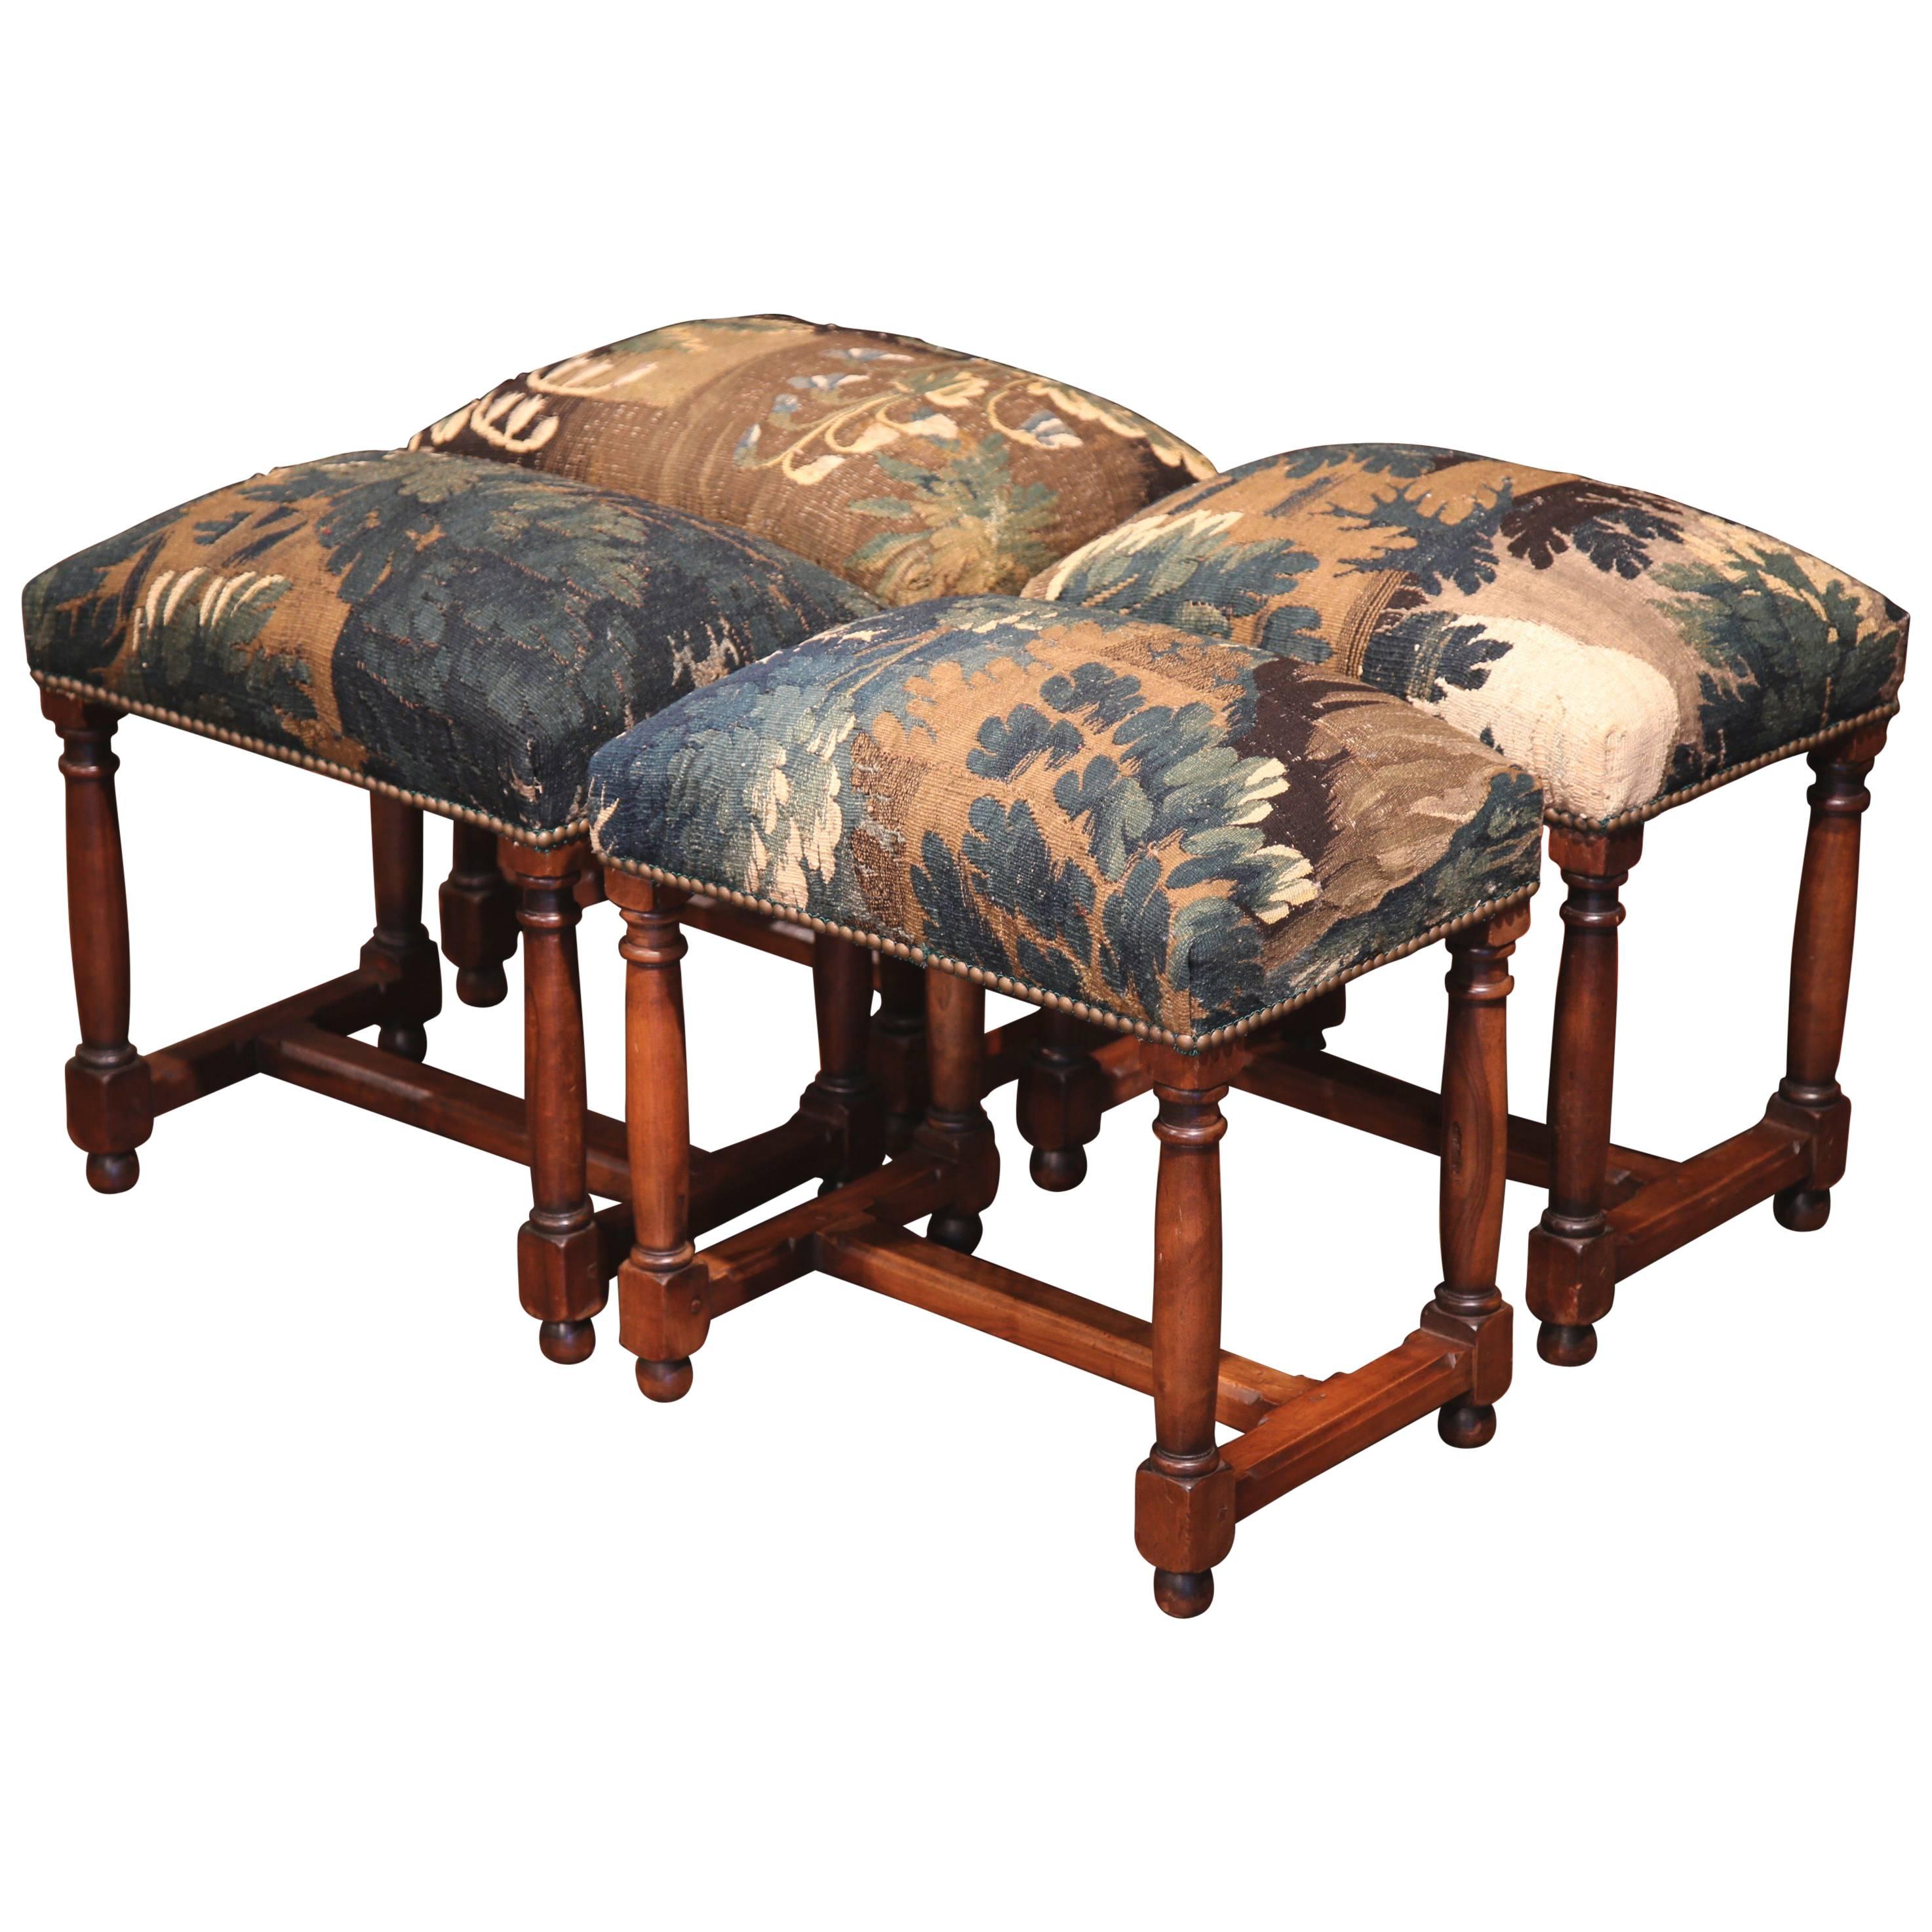 19th Century French Suite of Four Carved Walnut Stools with Aubusson Tapestry